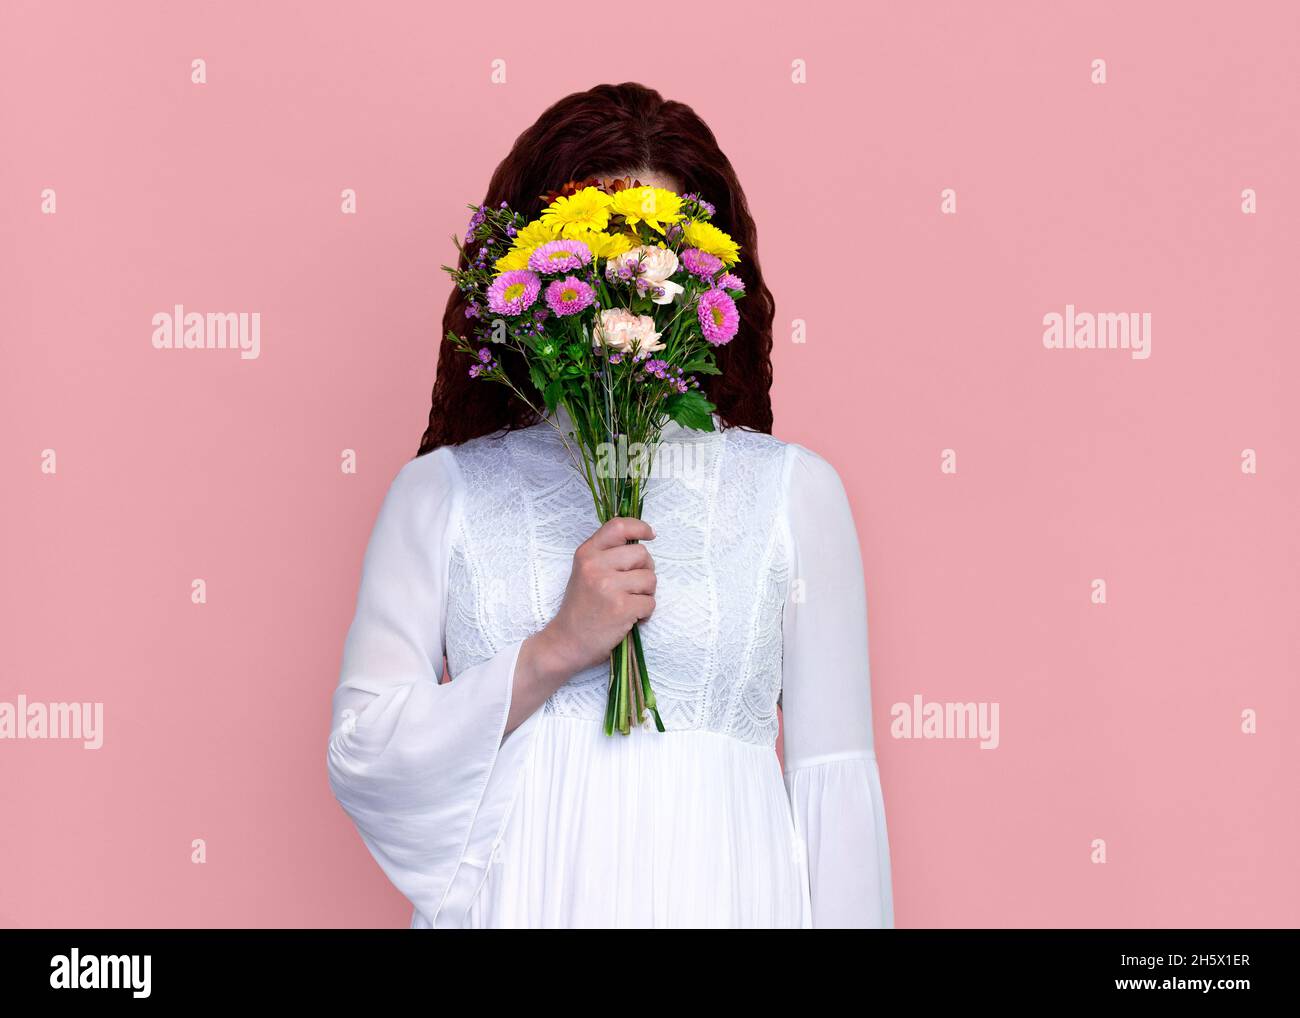 Woman with Flower Bouquet in Front of Face on Pink Background. Studio portrait of playful woman holding flower bouquet in front of her face. Stock Photo